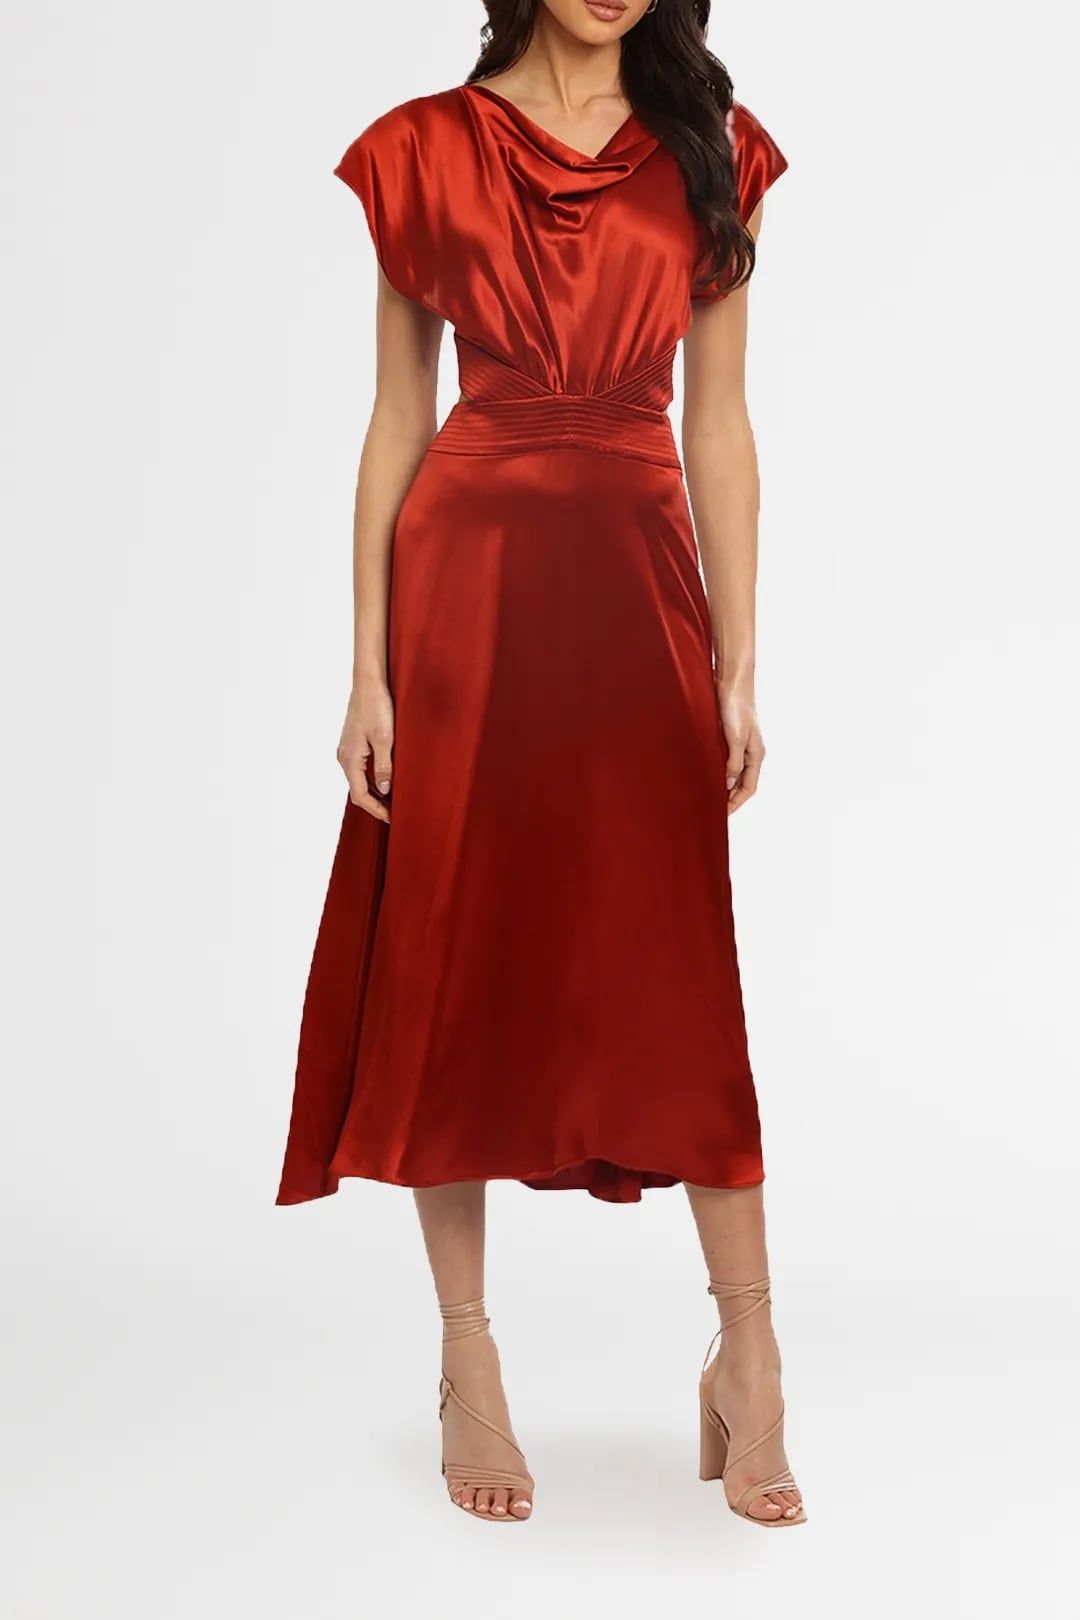 Hire Plympton dress in red for cocktail events.